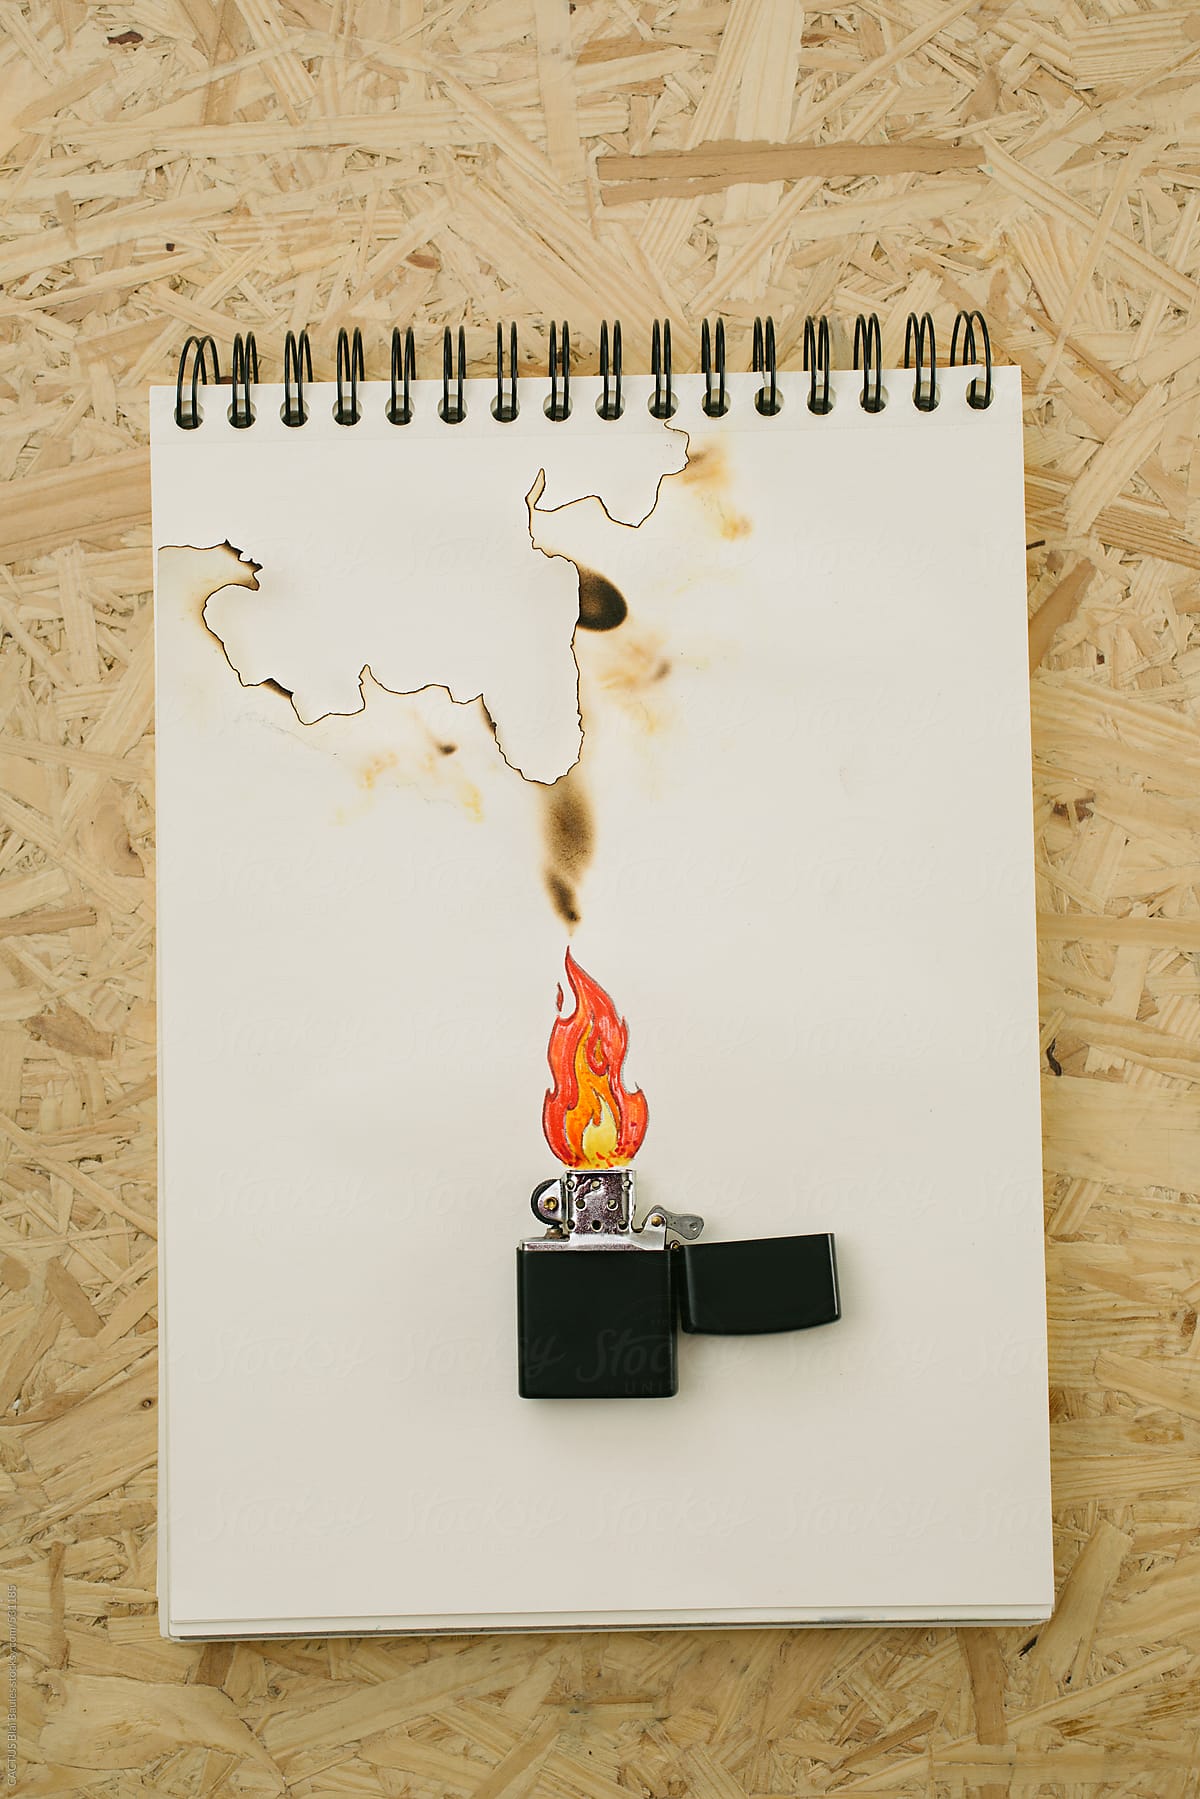 Fire on paper